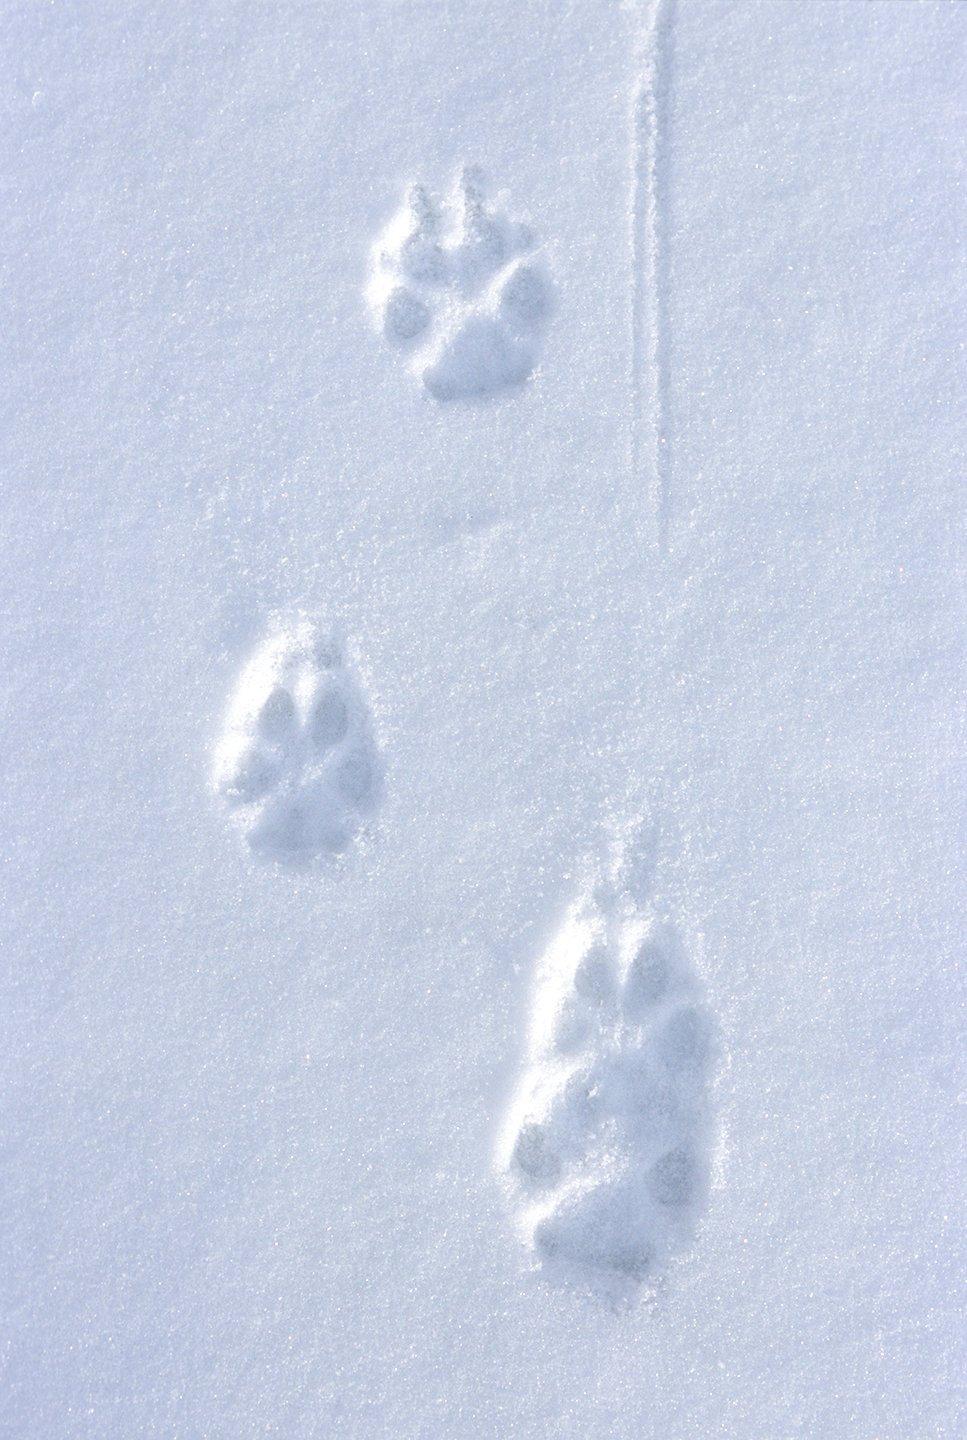 Wolf tracks in the snow. Photo by Images on the Wildside